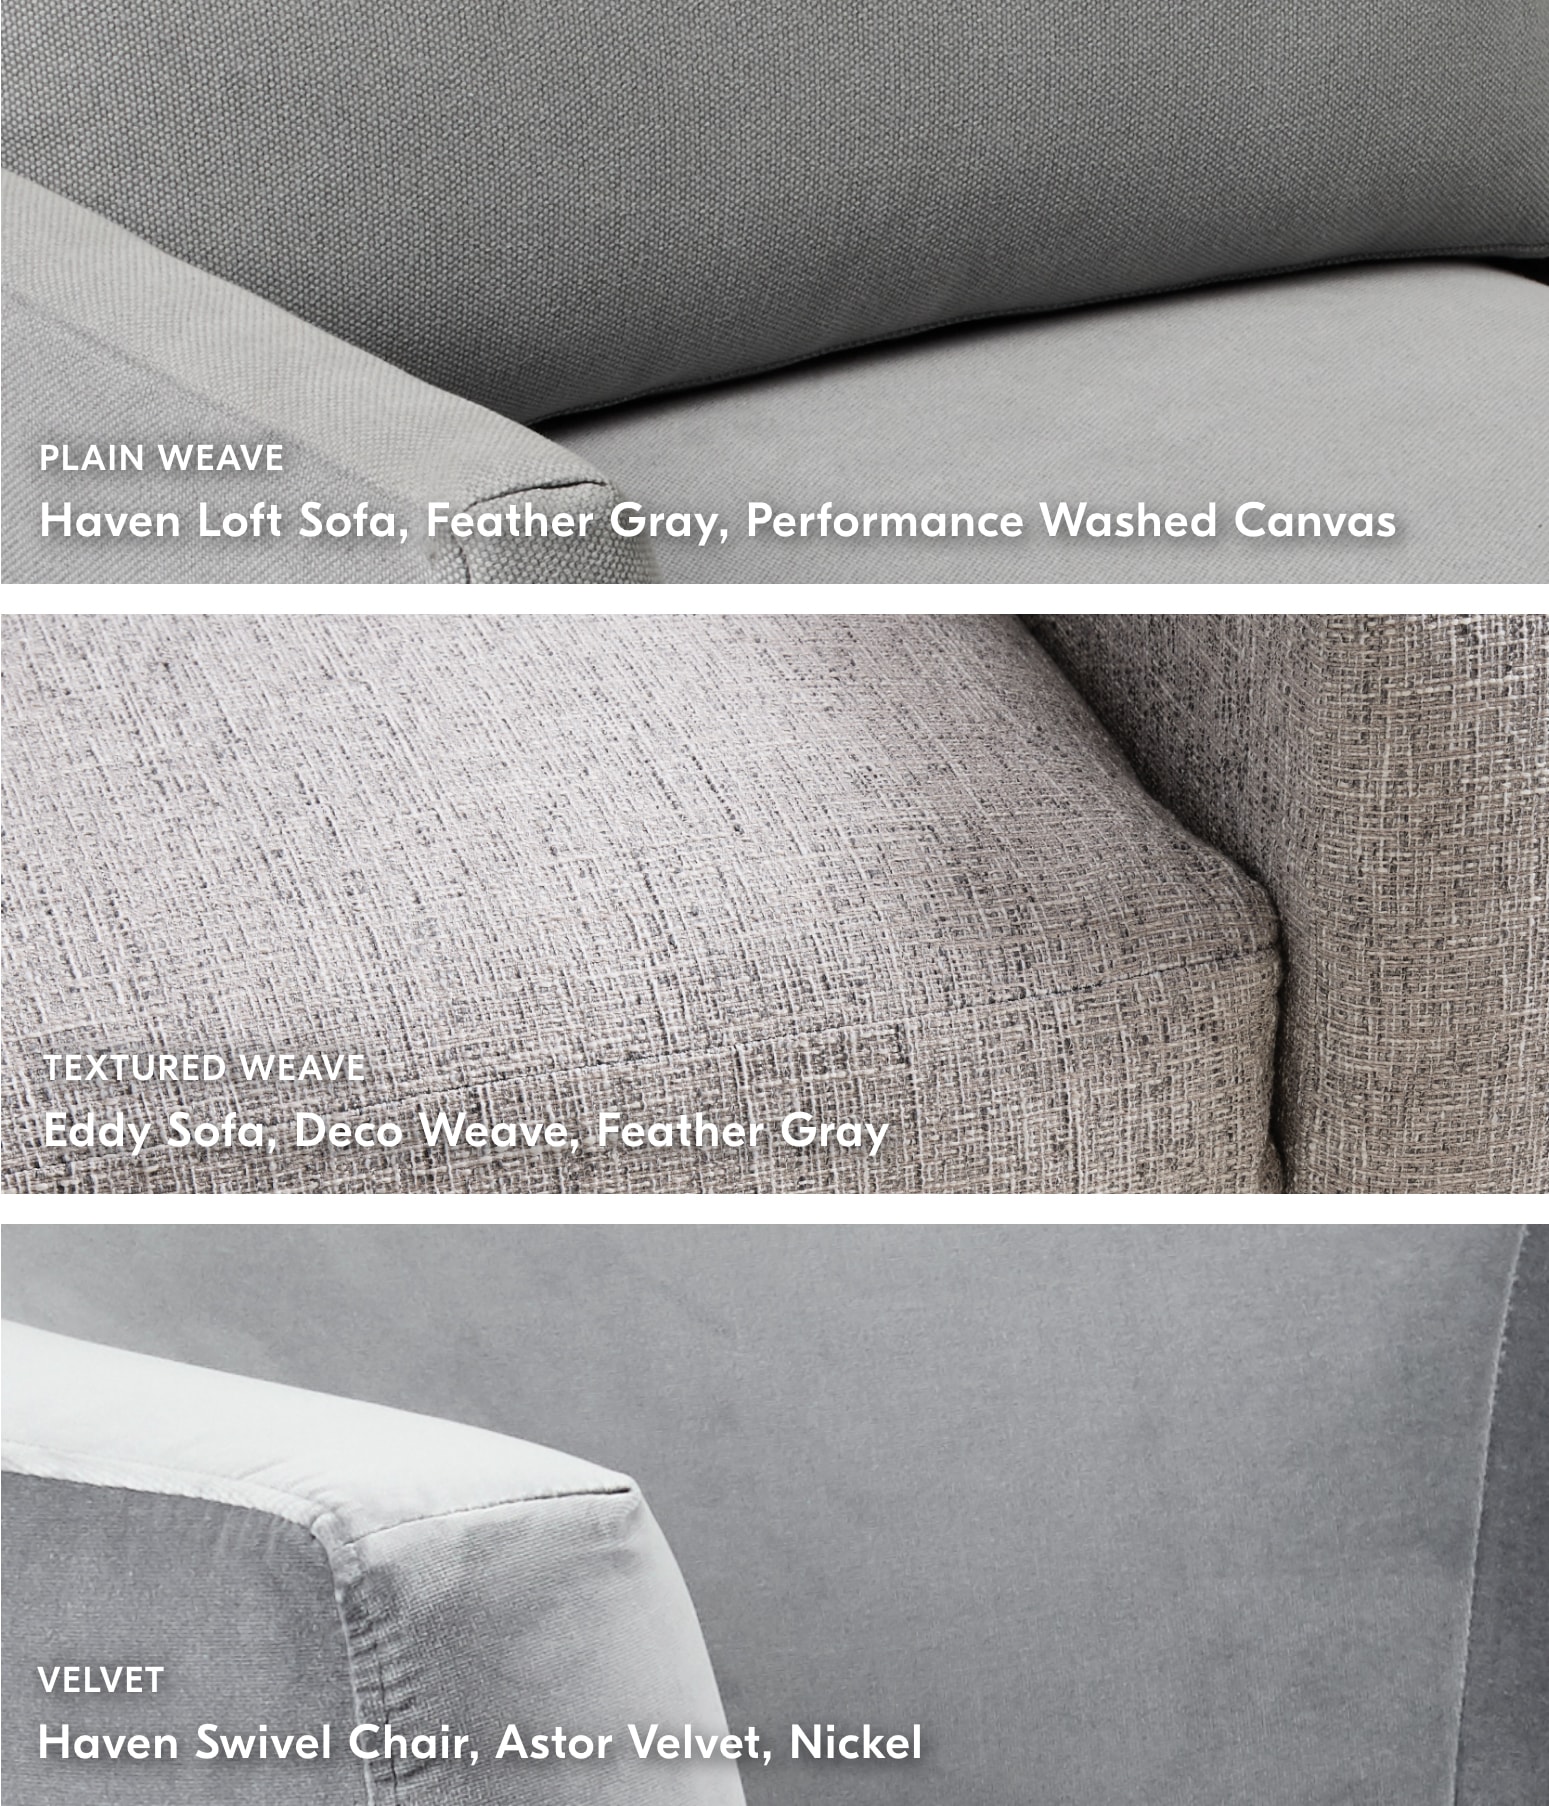 West Elm Fabric Swatches - www.inf-inet.com